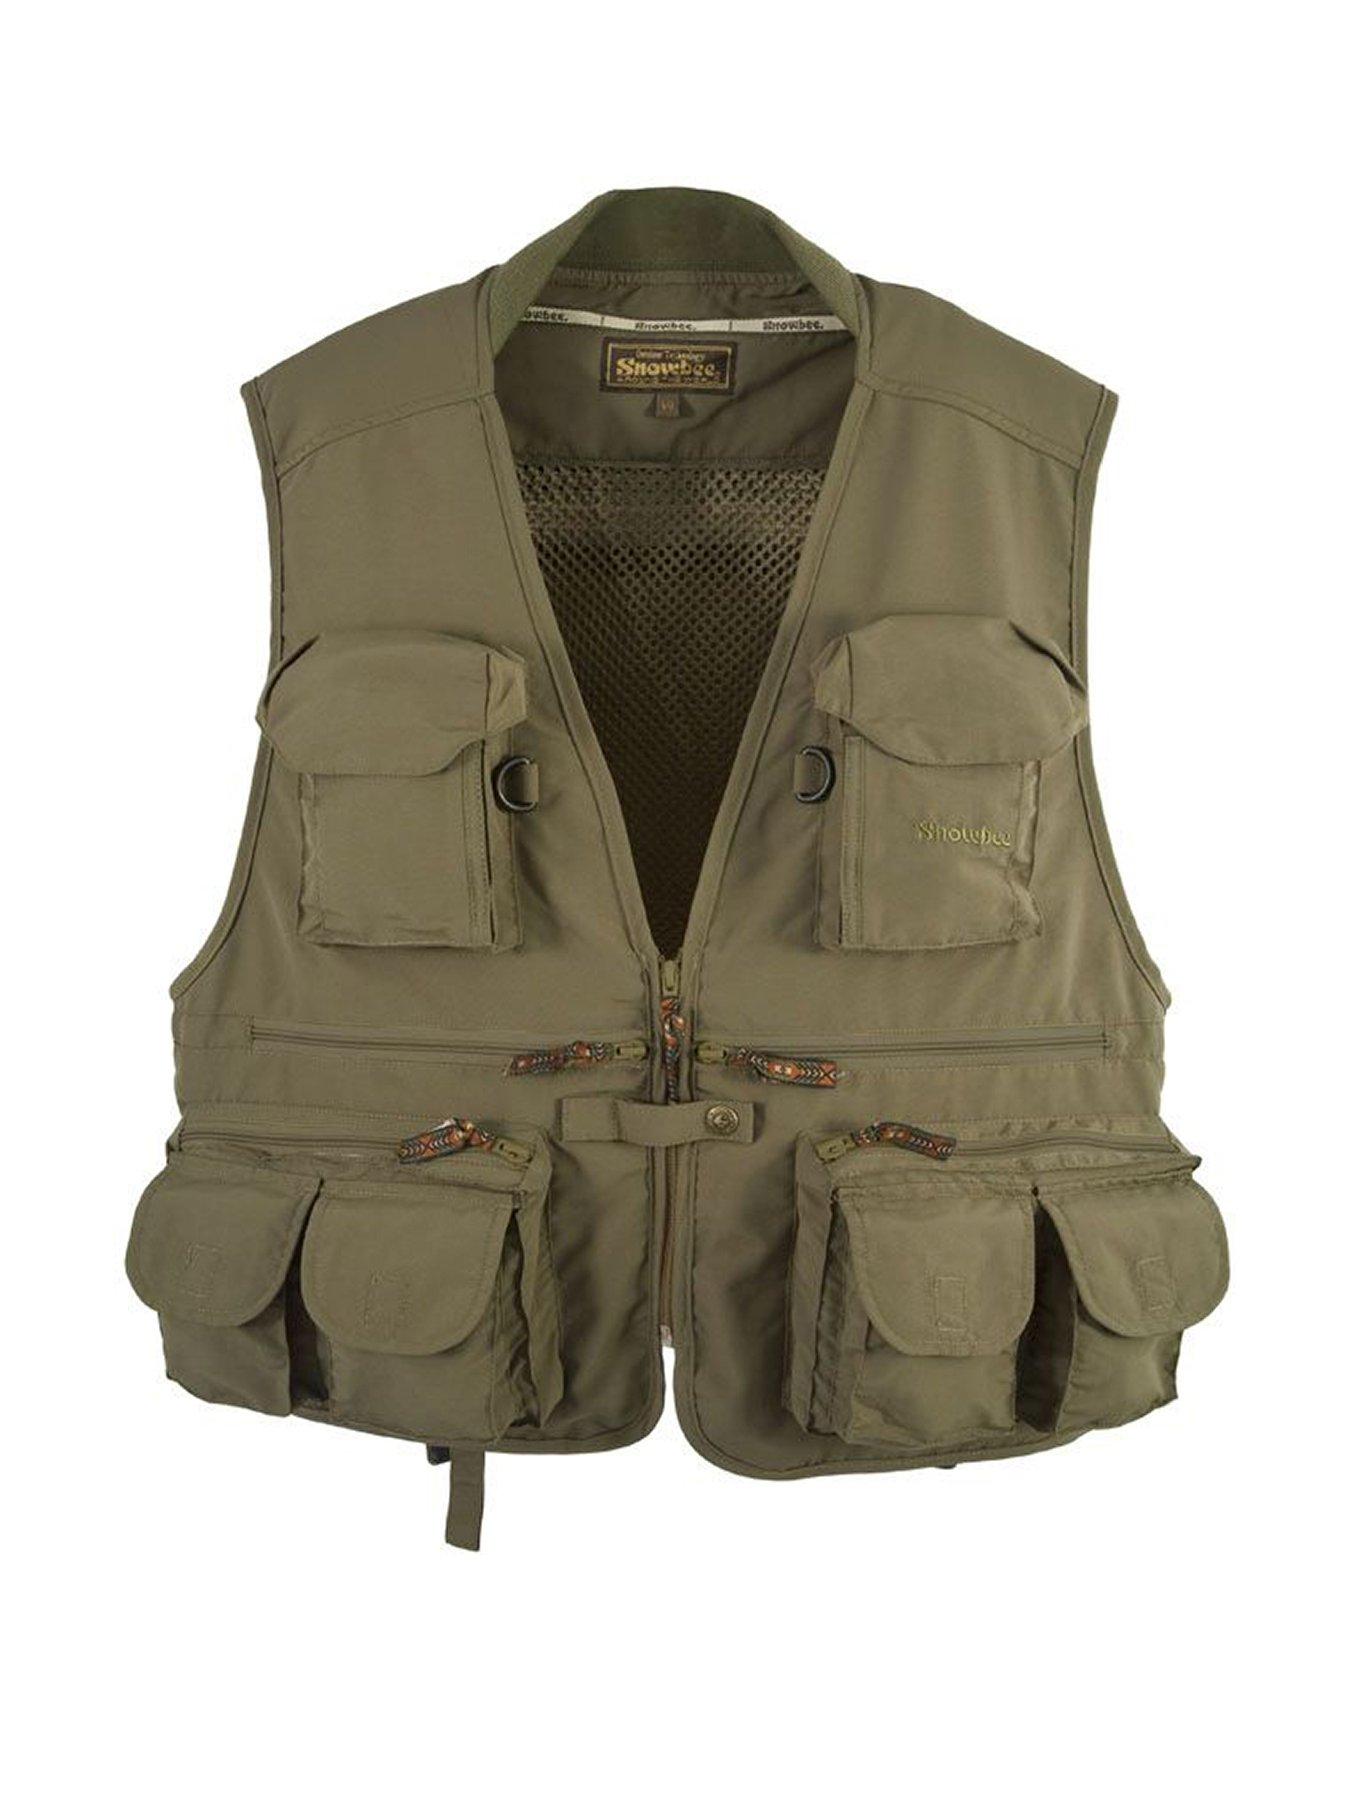 Snowbee Classic Fly Fishing Vest Waistcoat - Olive Green